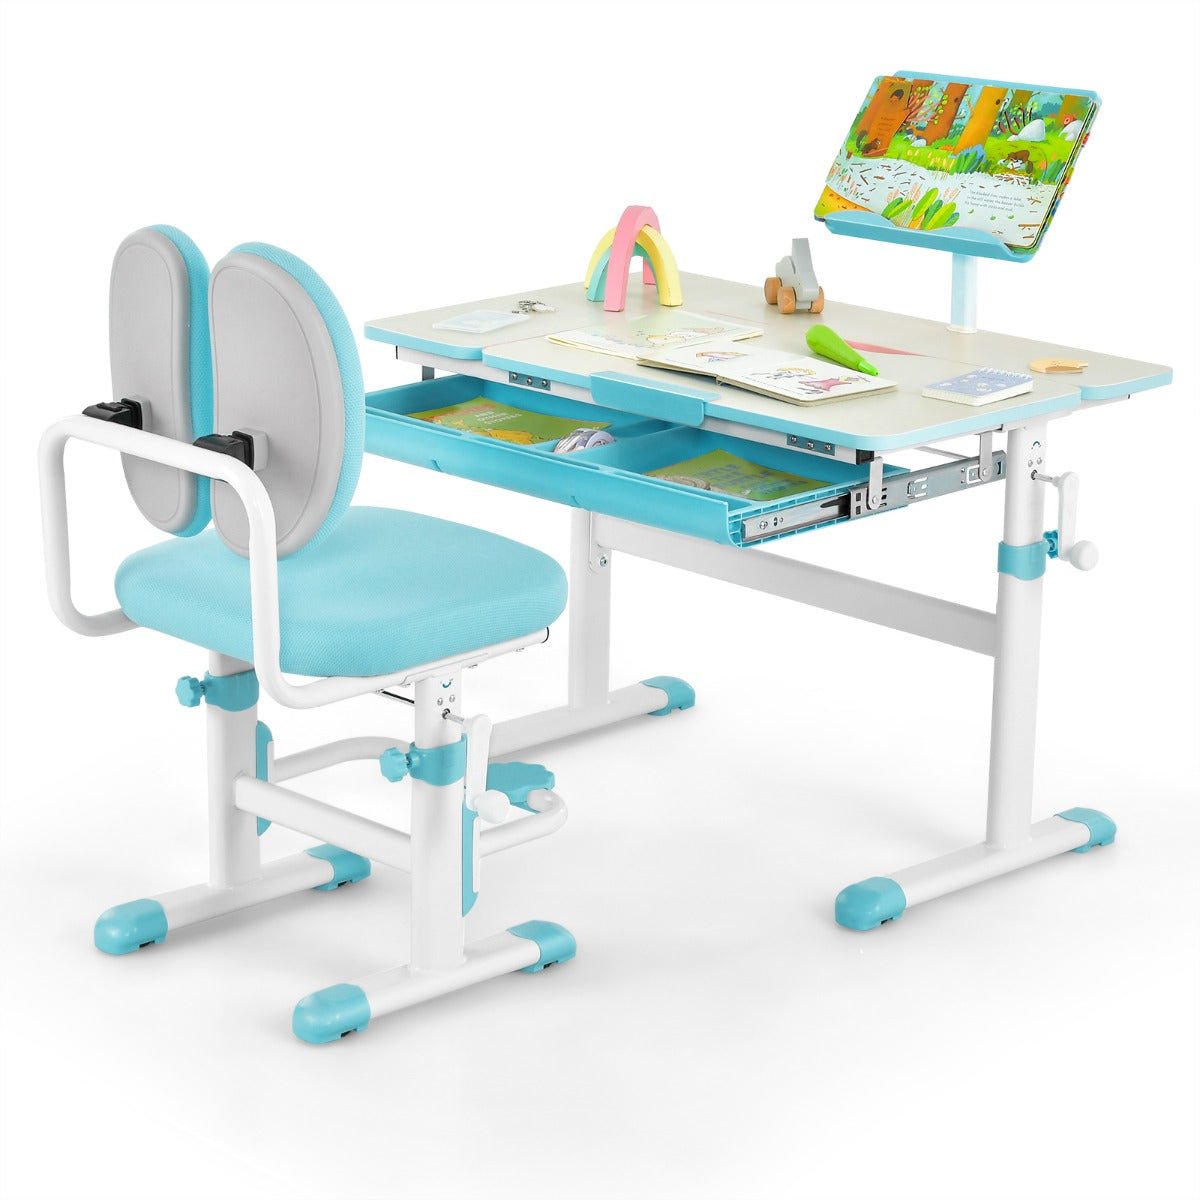 Shop Blue Kid's Study Desk & Chair Set - Ideal for Young Scholars